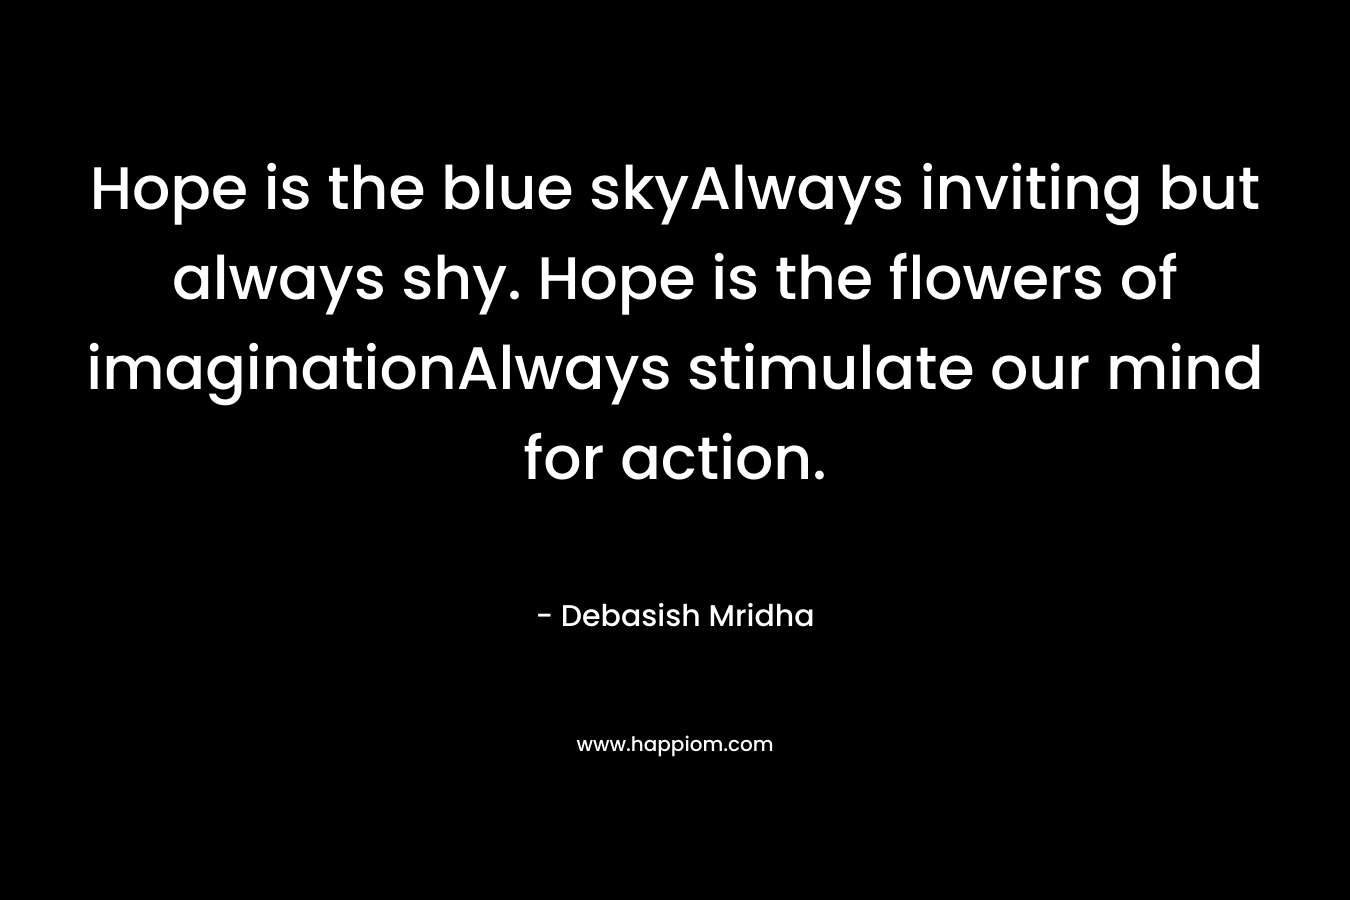 Hope is the blue skyAlways inviting but always shy. Hope is the flowers of imaginationAlways stimulate our mind for action. – Debasish Mridha